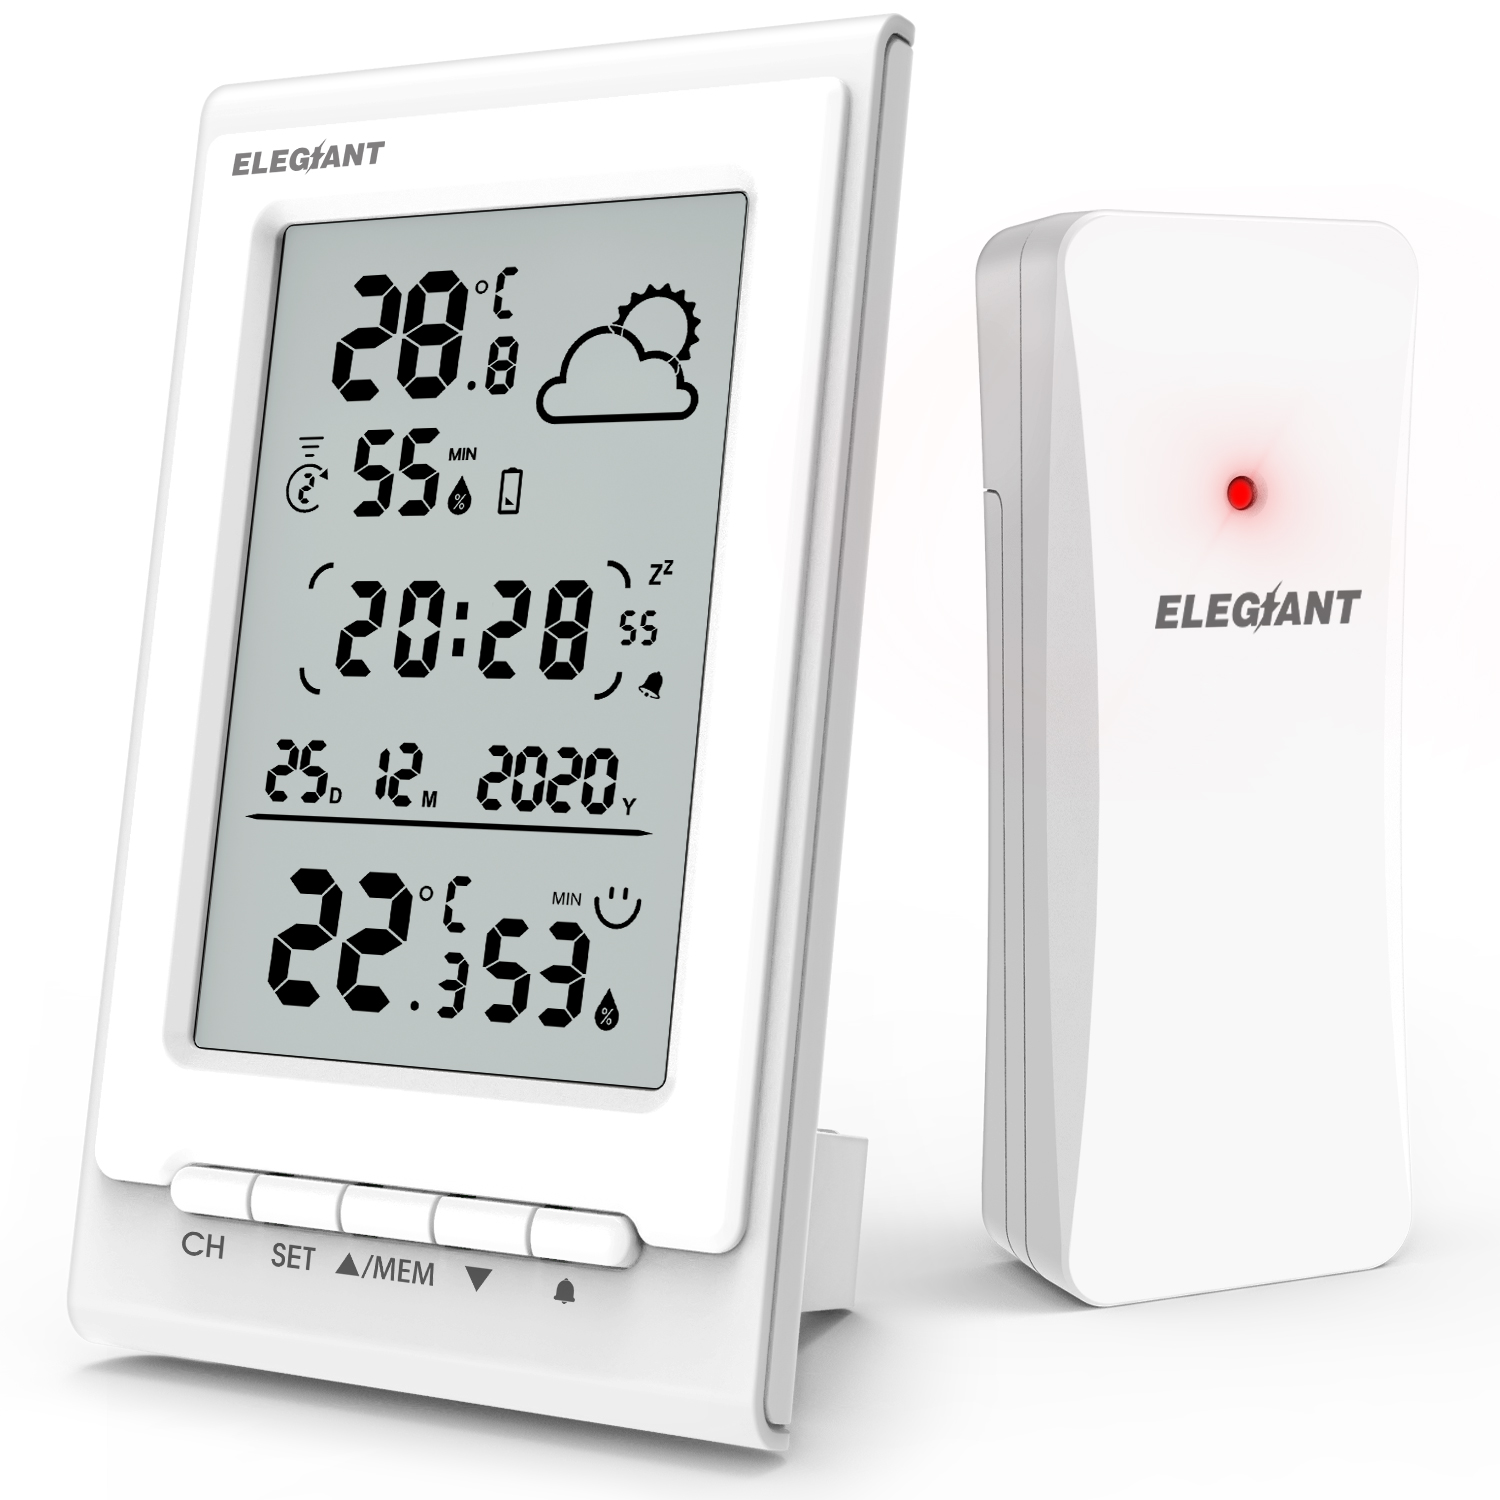 ELEGIANT-EOX-9901-Electronic-Thermometer-Hygrometer-Multifunctional-Wireless-HD-Glass-Weather-Statio-1881596-10